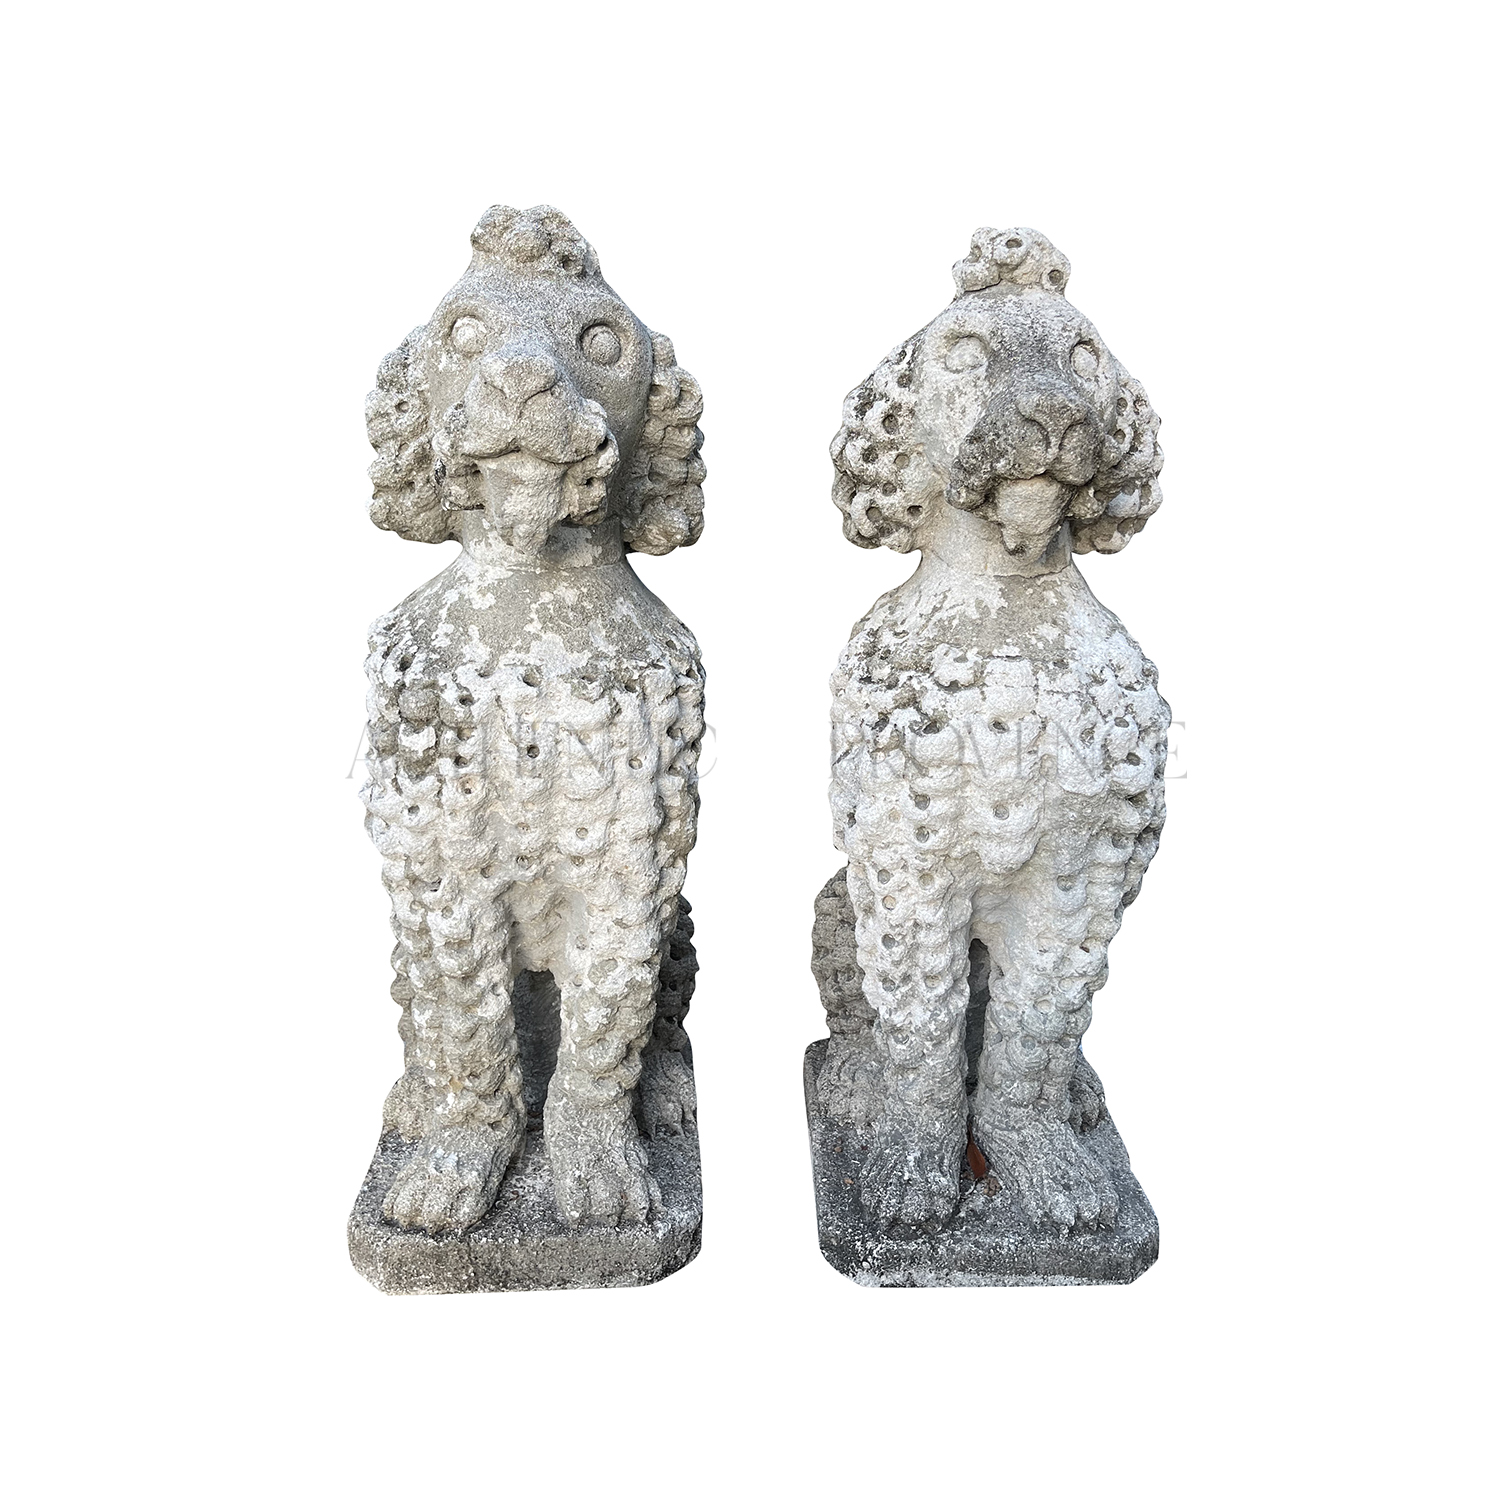 Vintage Pair of French Dog Poodle Garden Statues